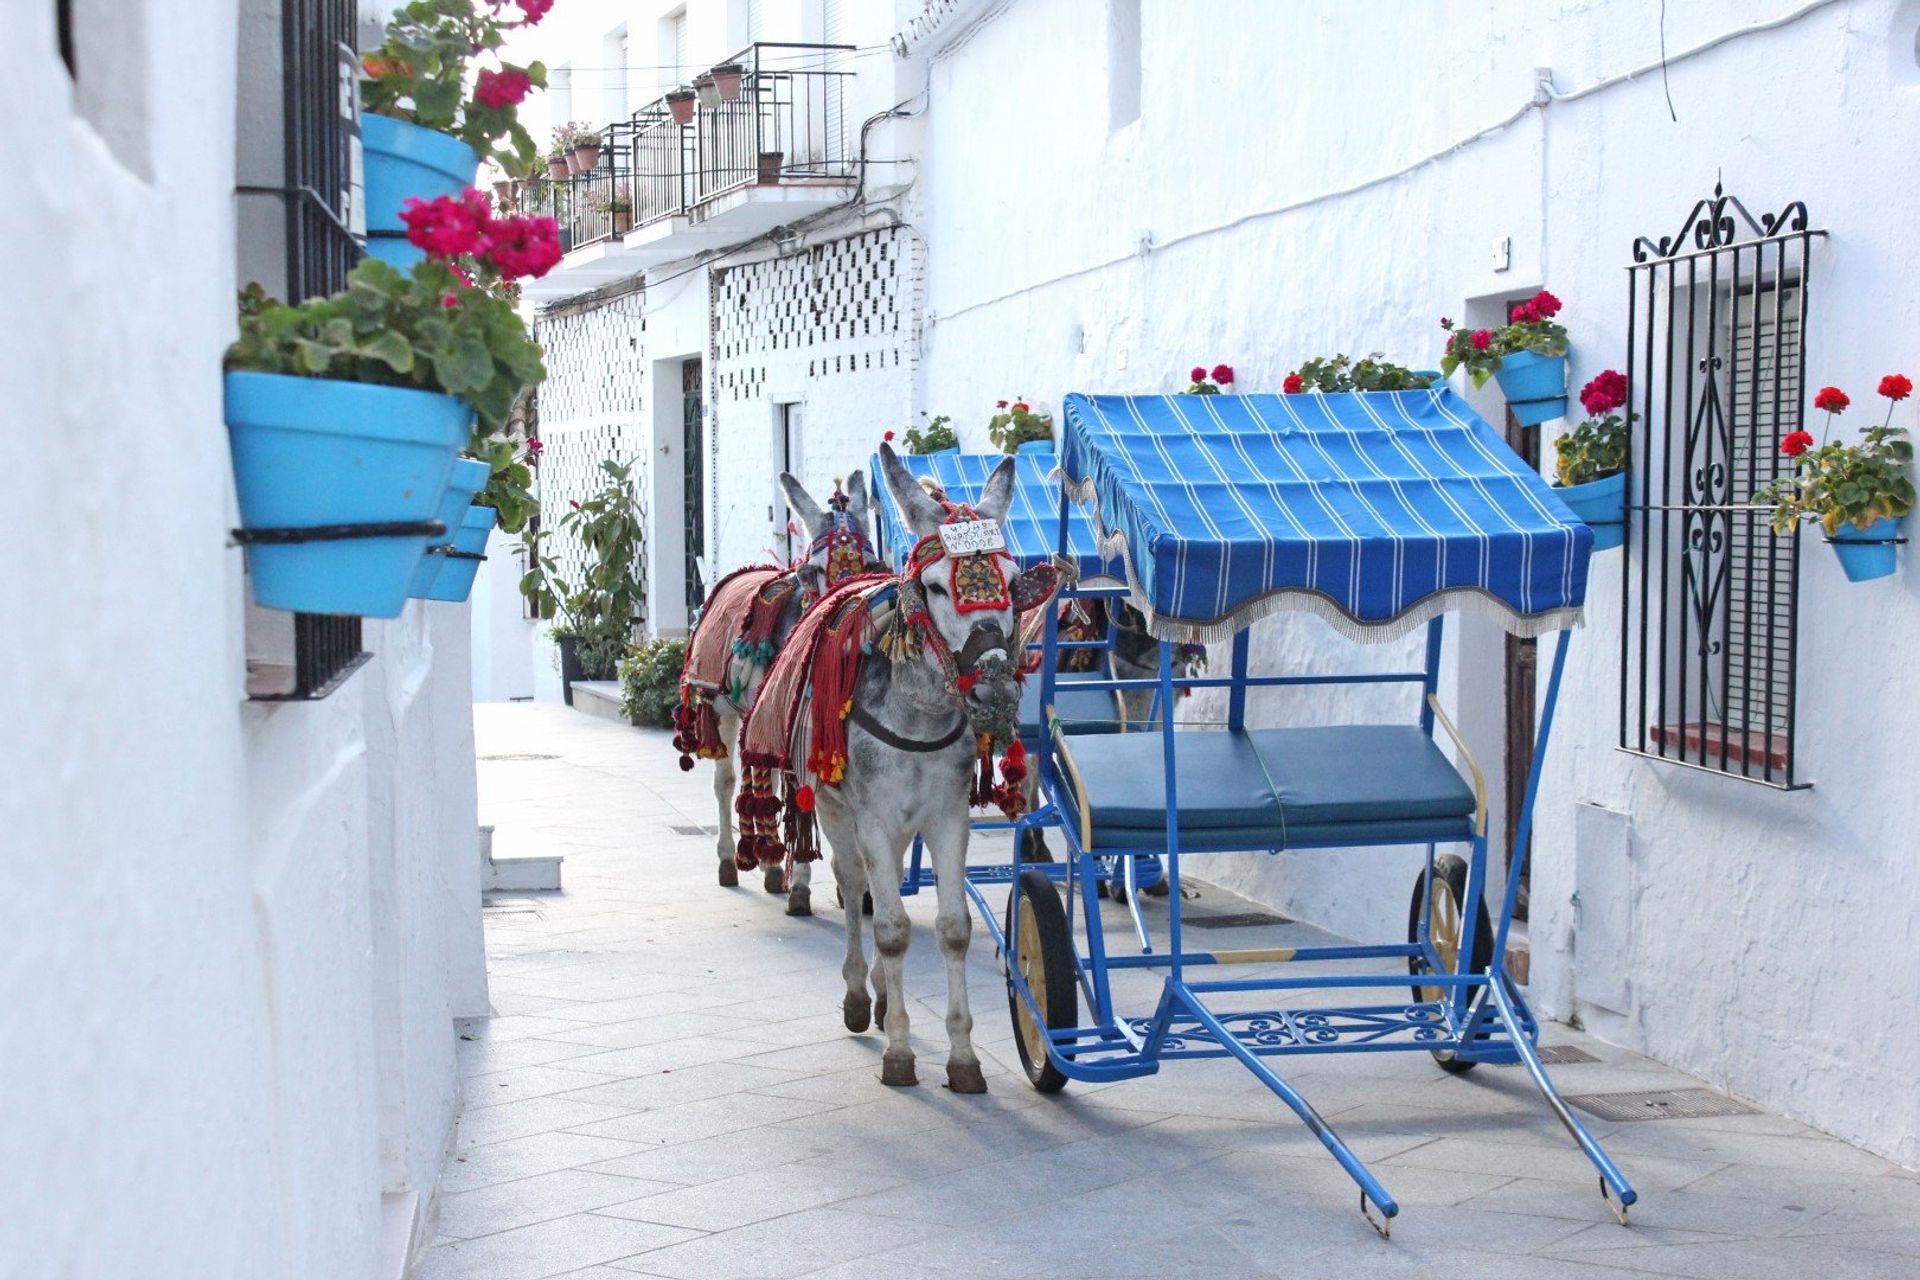 Donkey taxi, the traditional means of transportation in Mijas